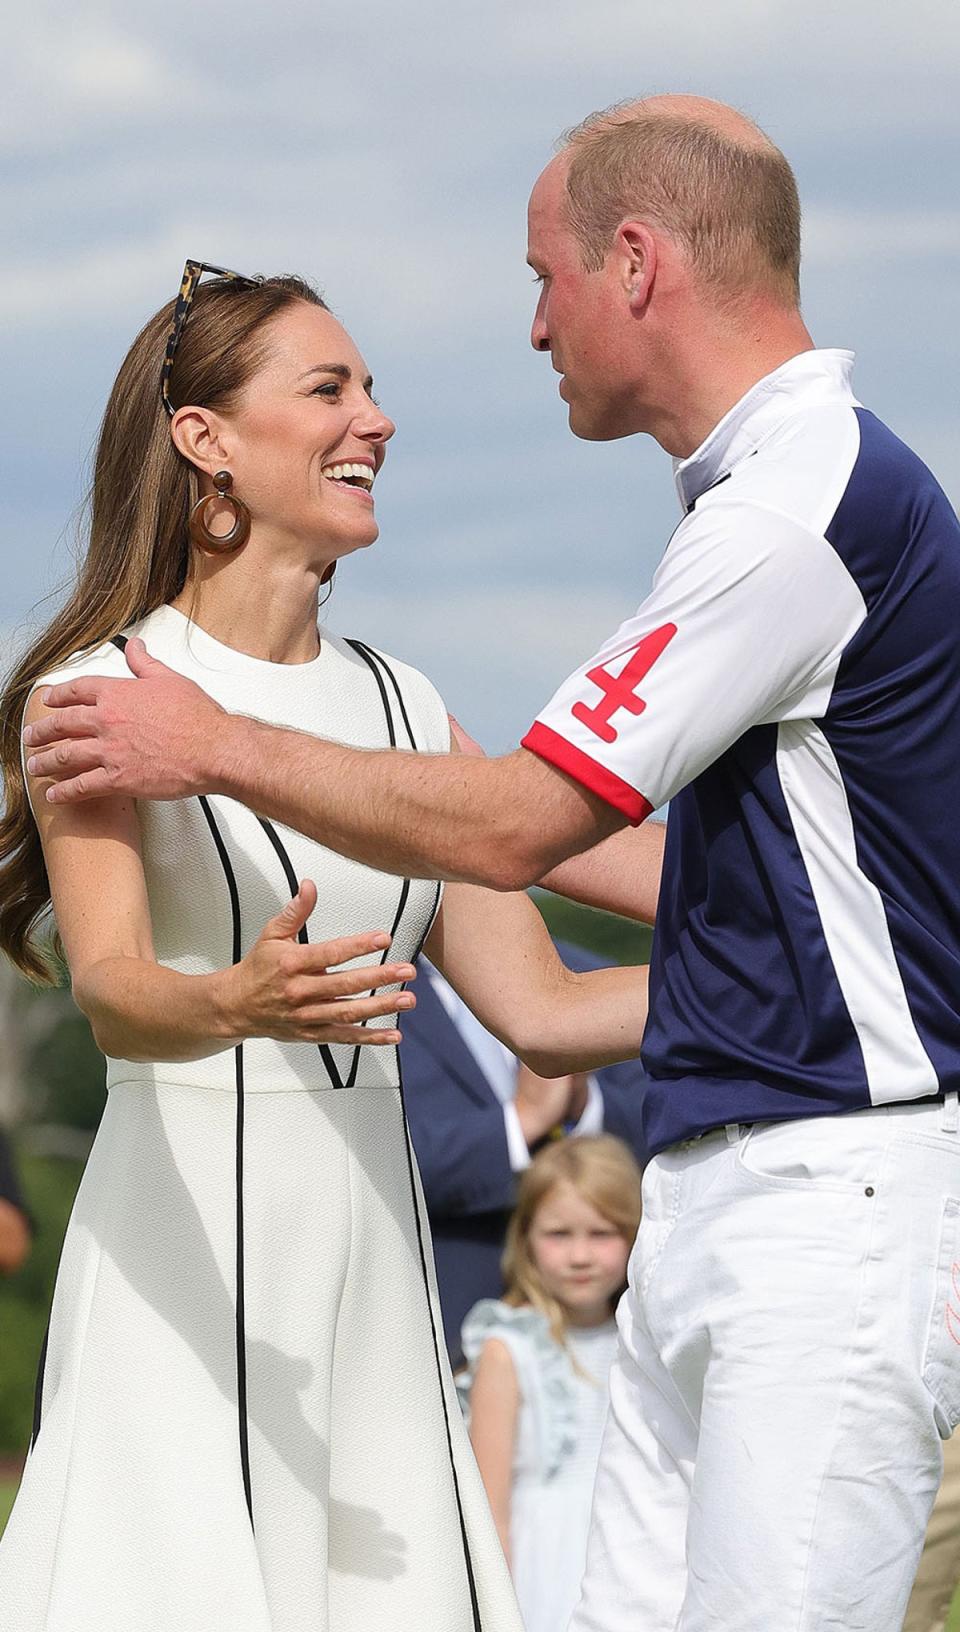 The Duke and Duchess of Cambridge at a polo match in July (Getty)